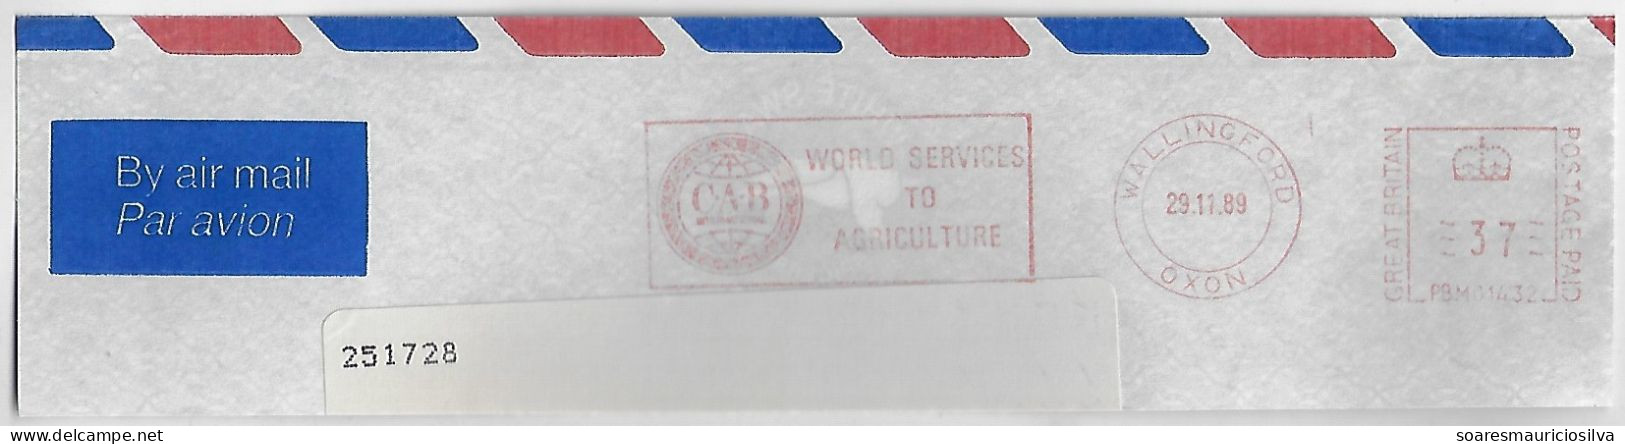 Great Britain 1989 Meter Stamp Pitney Bowes 5000 Slogan CAB International World Services To Agriculture Wallingford - Lettres & Documents